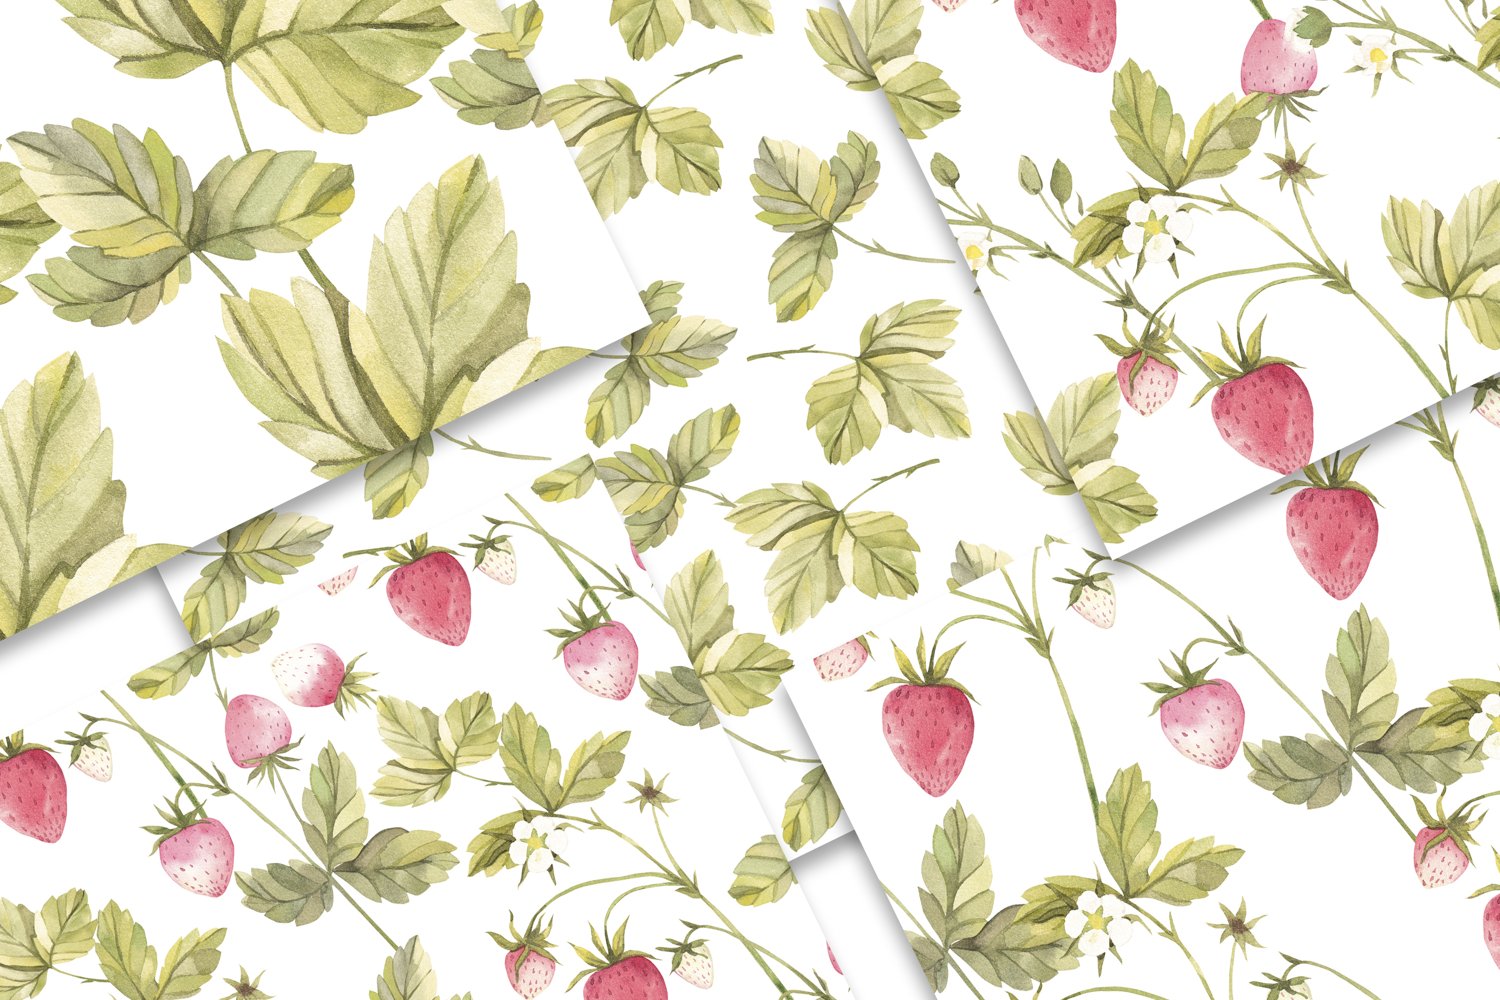 Watercolor seamless pattern with strawberries.